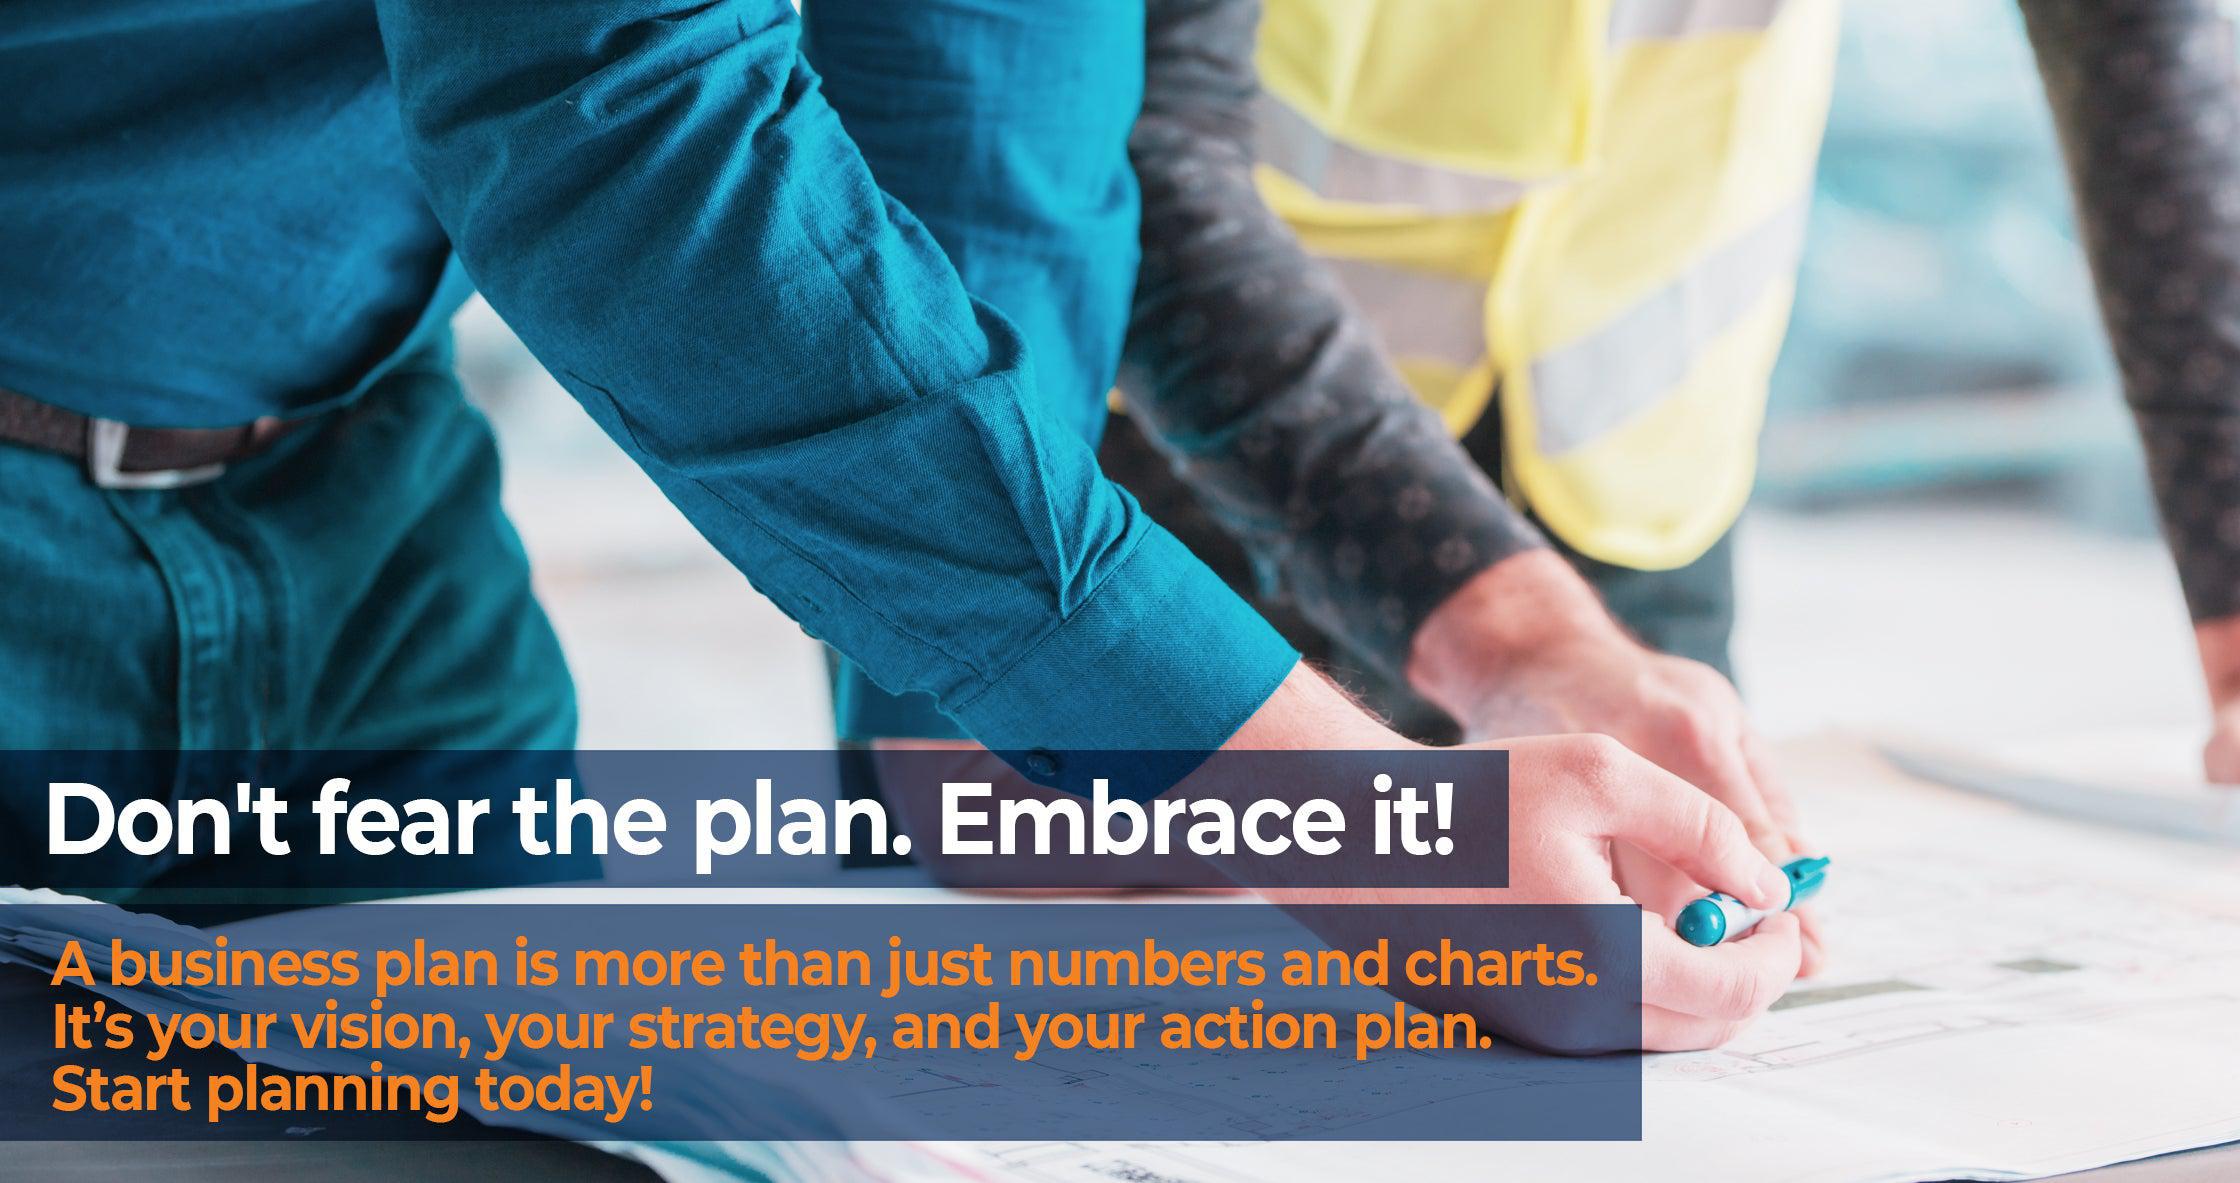 Don't fear the plan. Embrace it! A business plan is more than just numbers and charts. It’s your vision, your strategy, and your action plan. Start planning today!